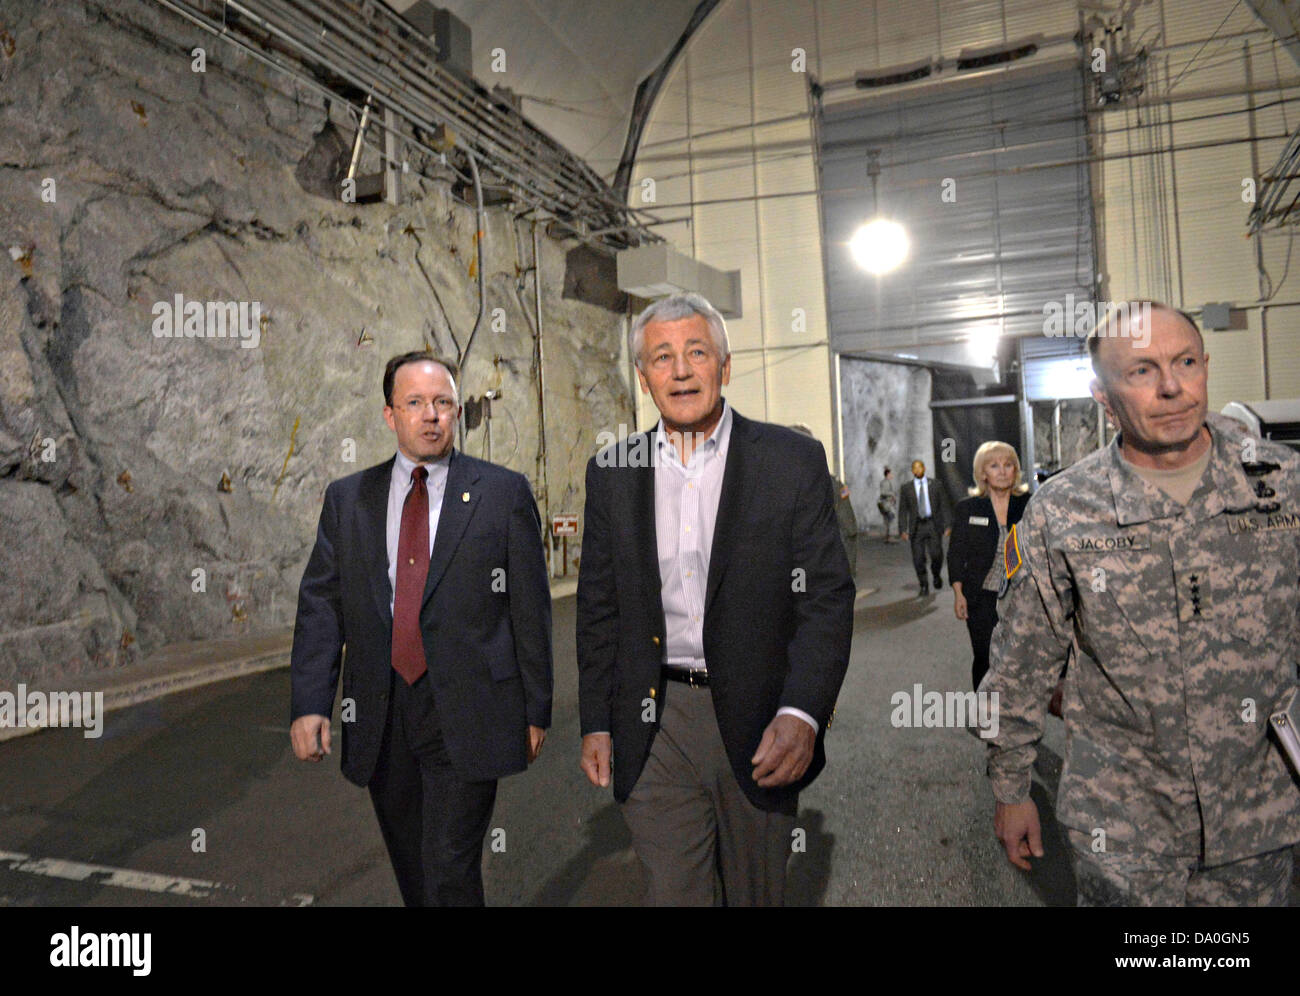 US Secretary of Defense Chuck Hagel is given a tour of the underground tunnels of Cheyenne Mountain Air Force Station by Steve Rose, left, and NORTHCOM commander Gen. Chuck Jacoby during a visit to USNORTHCOM June 28, 2013 in Colorado Springs, CO. Stock Photo